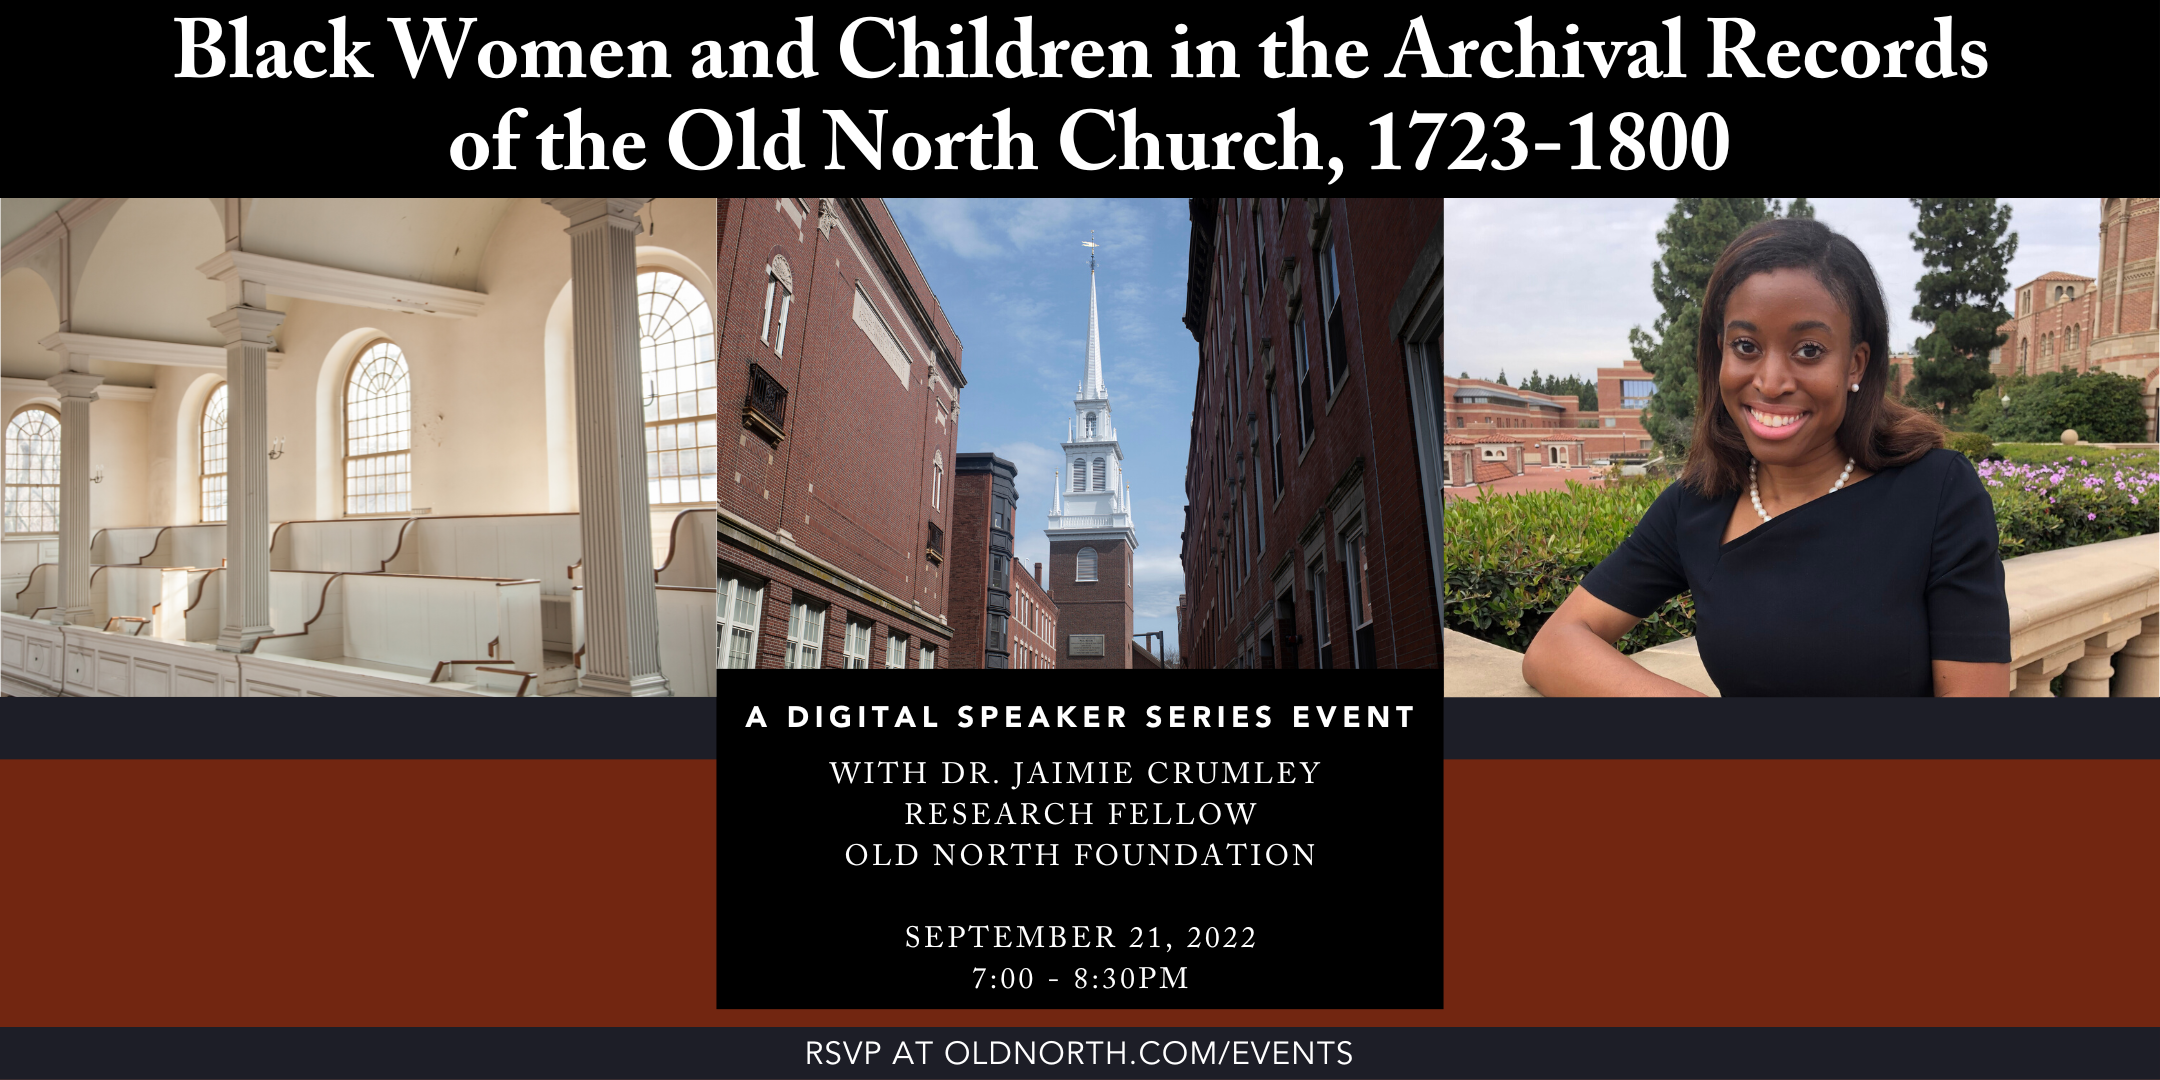 Black Women and Children in the Archival Records of the Old North Church, 1723 - 1800